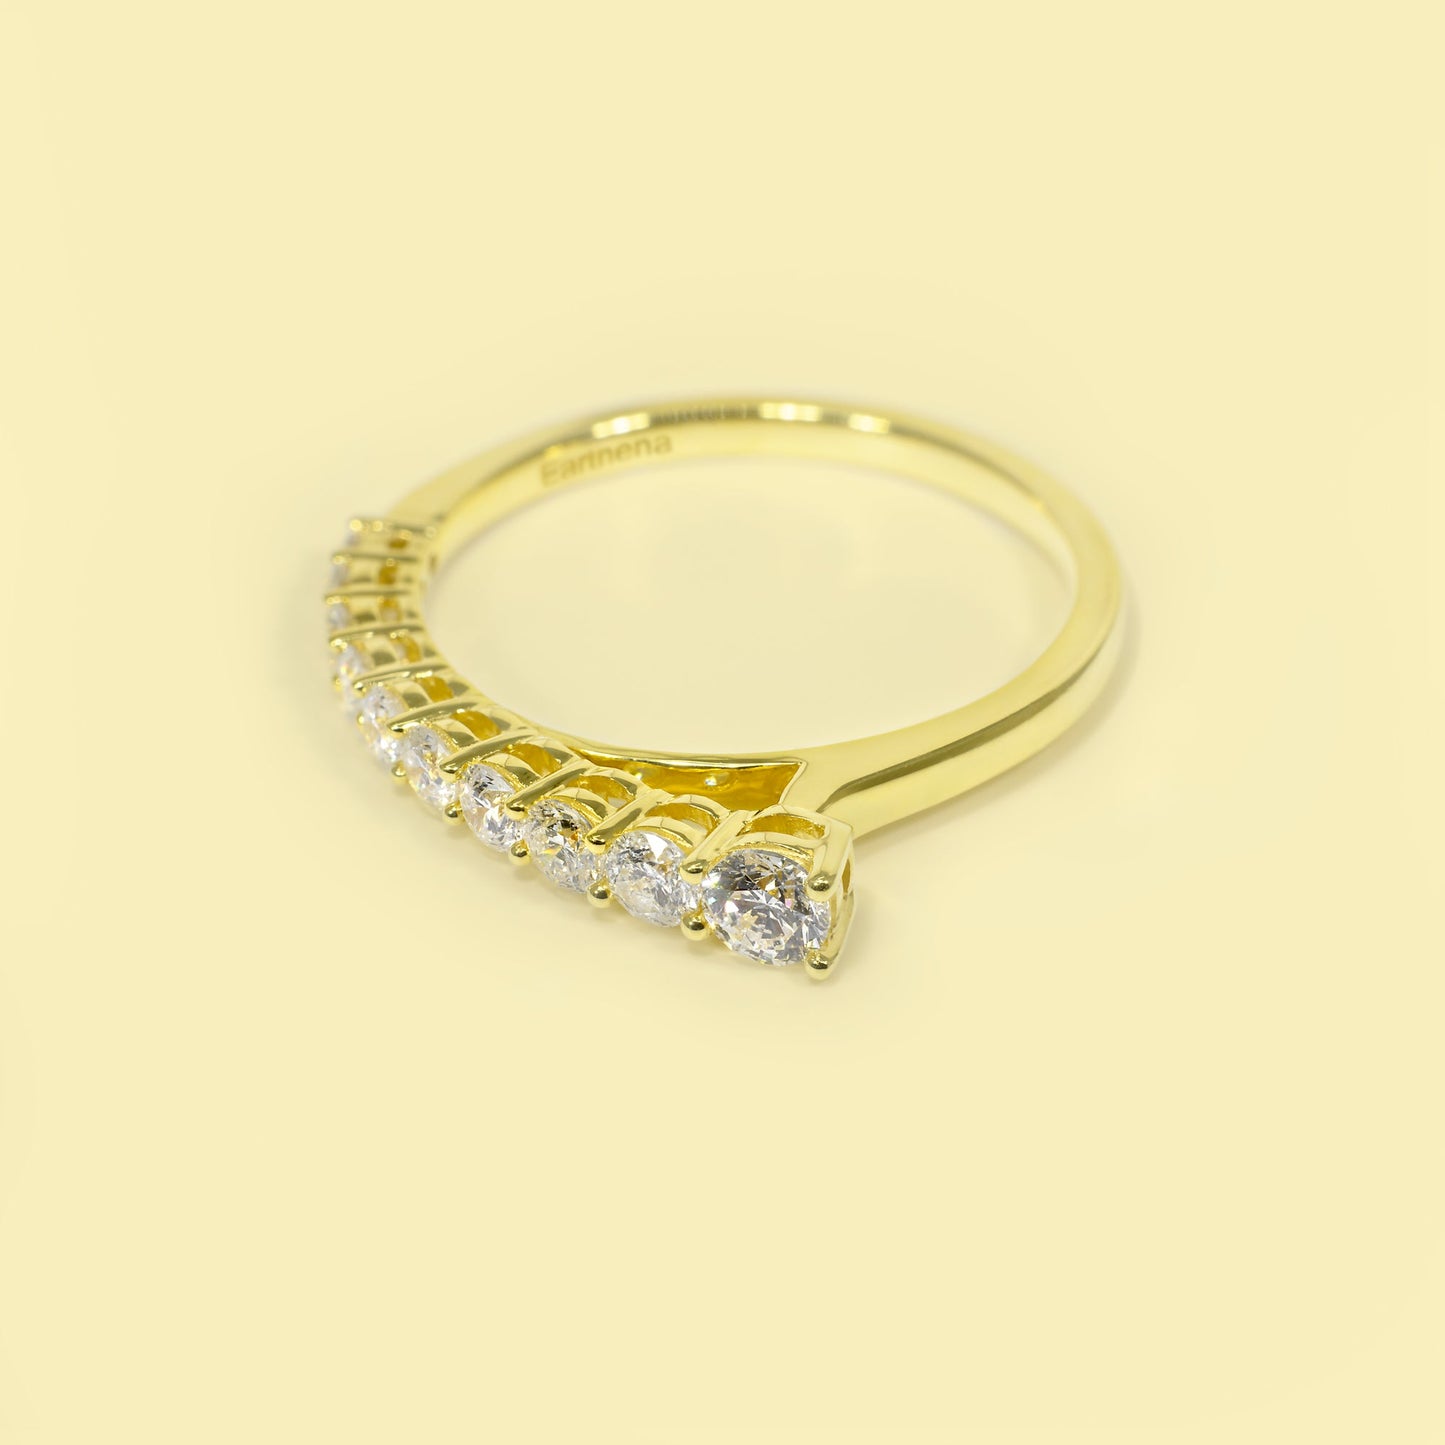 Billie Graduated Stackable Shared-prong Lab-grown Diamond Band Handcrafted in 14K or 18K Solid Gold by Earthena Jewelry